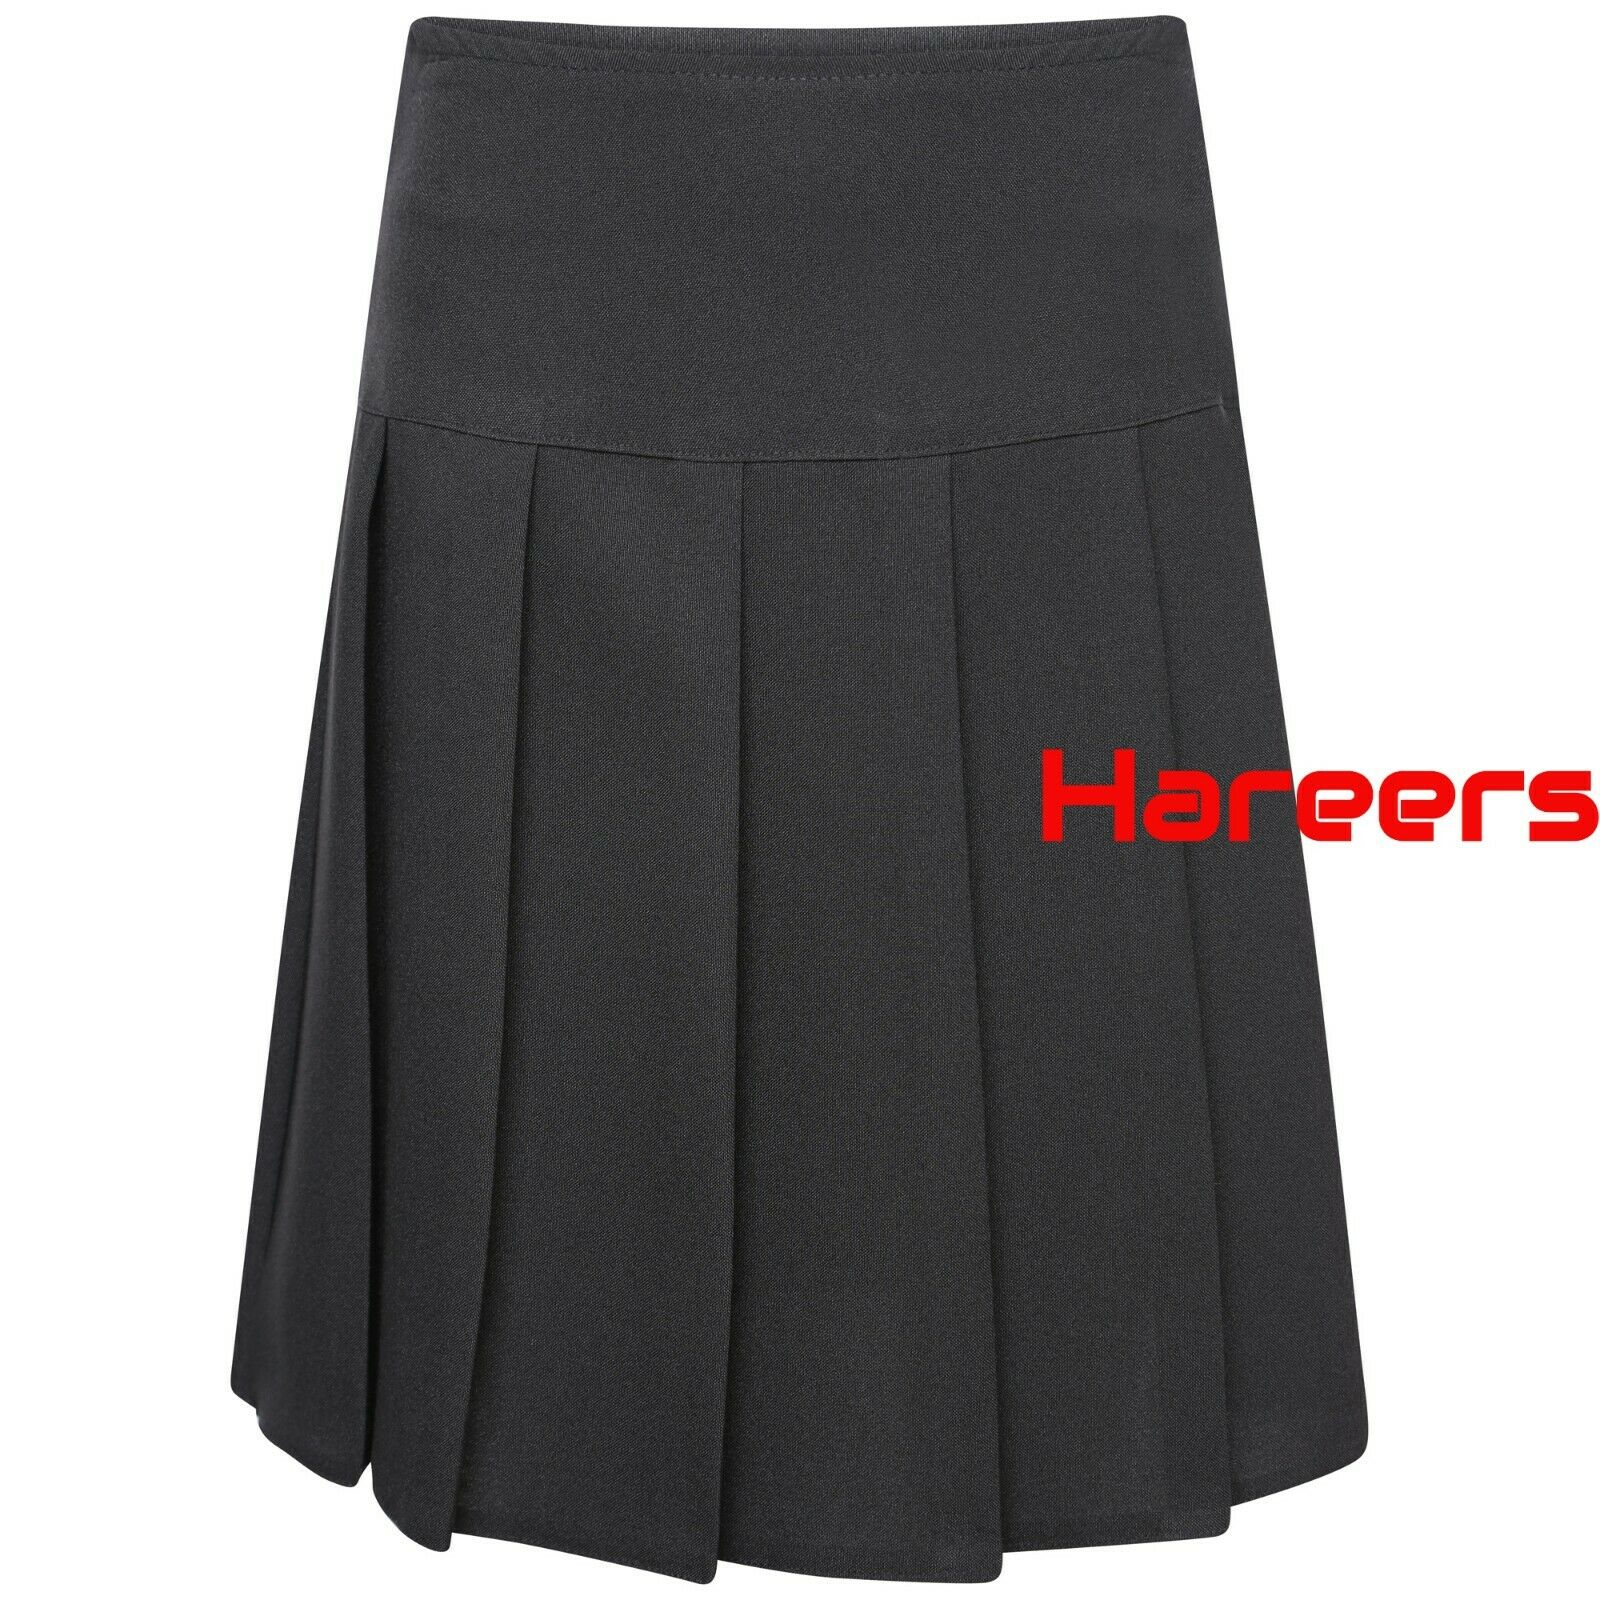 School Uniform All Round Knife Pleated Girls Skirt with Side Zip Closure -Black